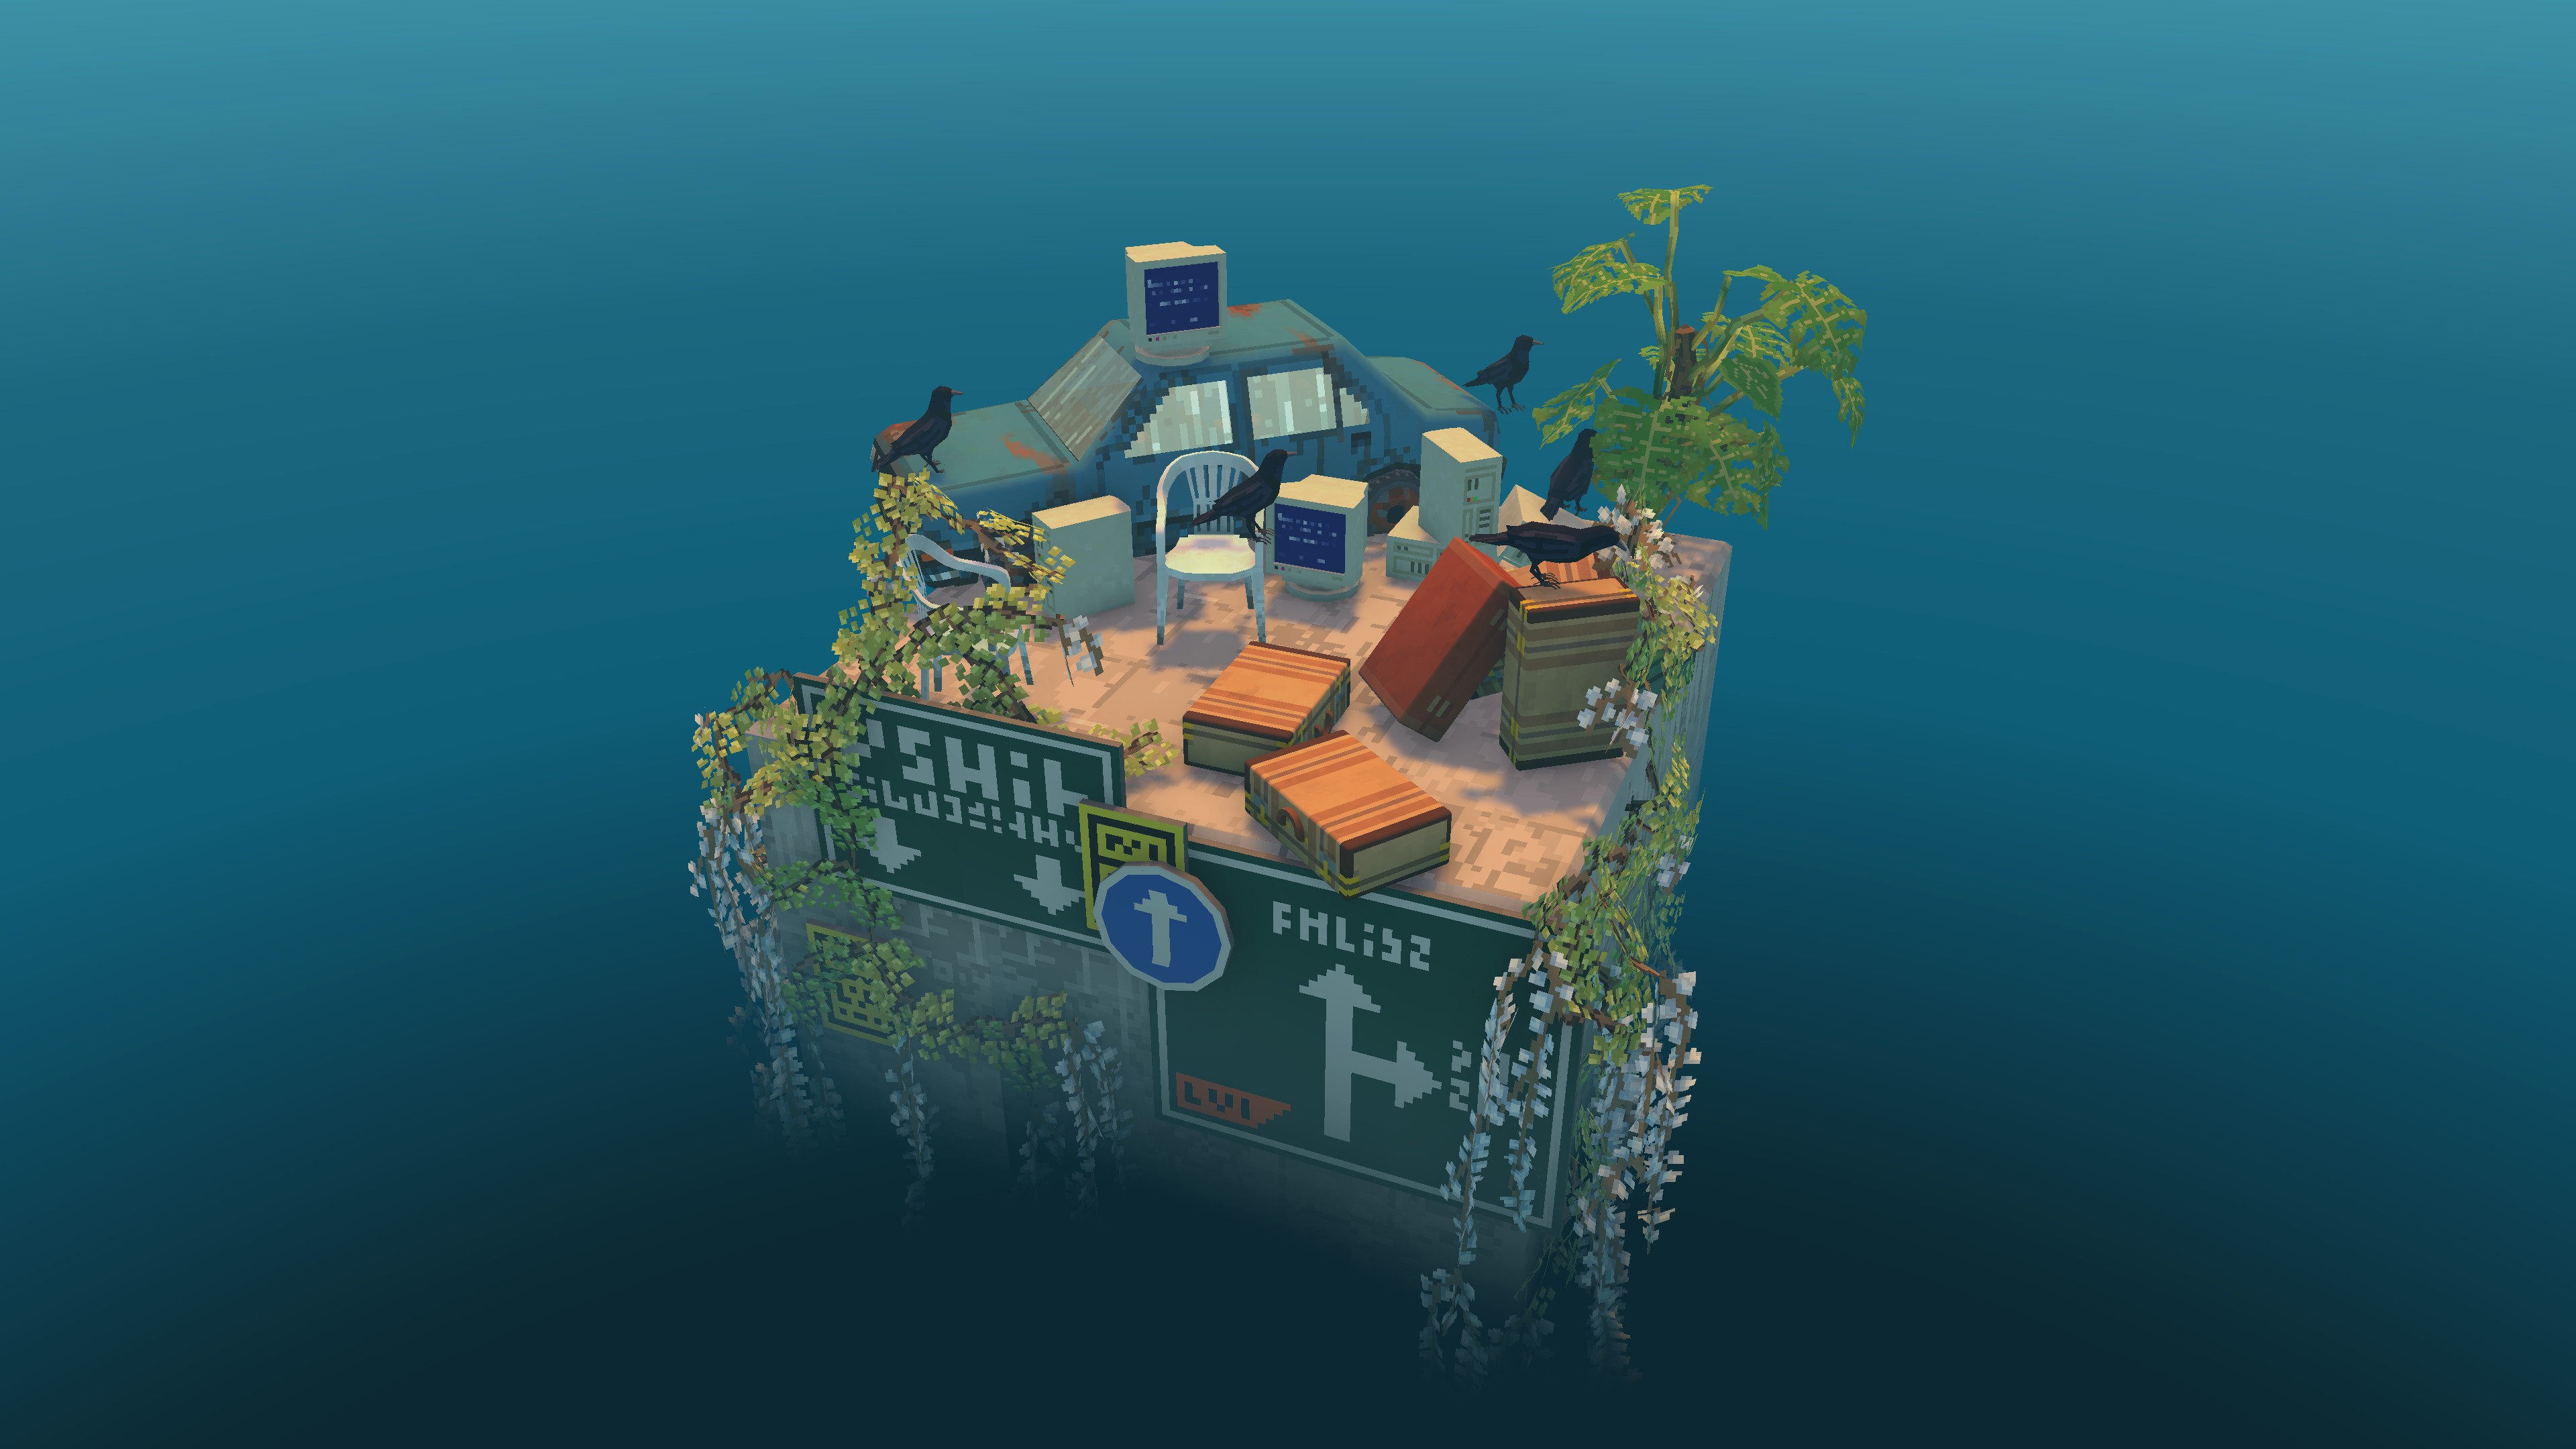 A screenshot from Cloud Gardens, displaying low-poly suitcases, garden chairs, street-signs and a car, overgrown with plants.